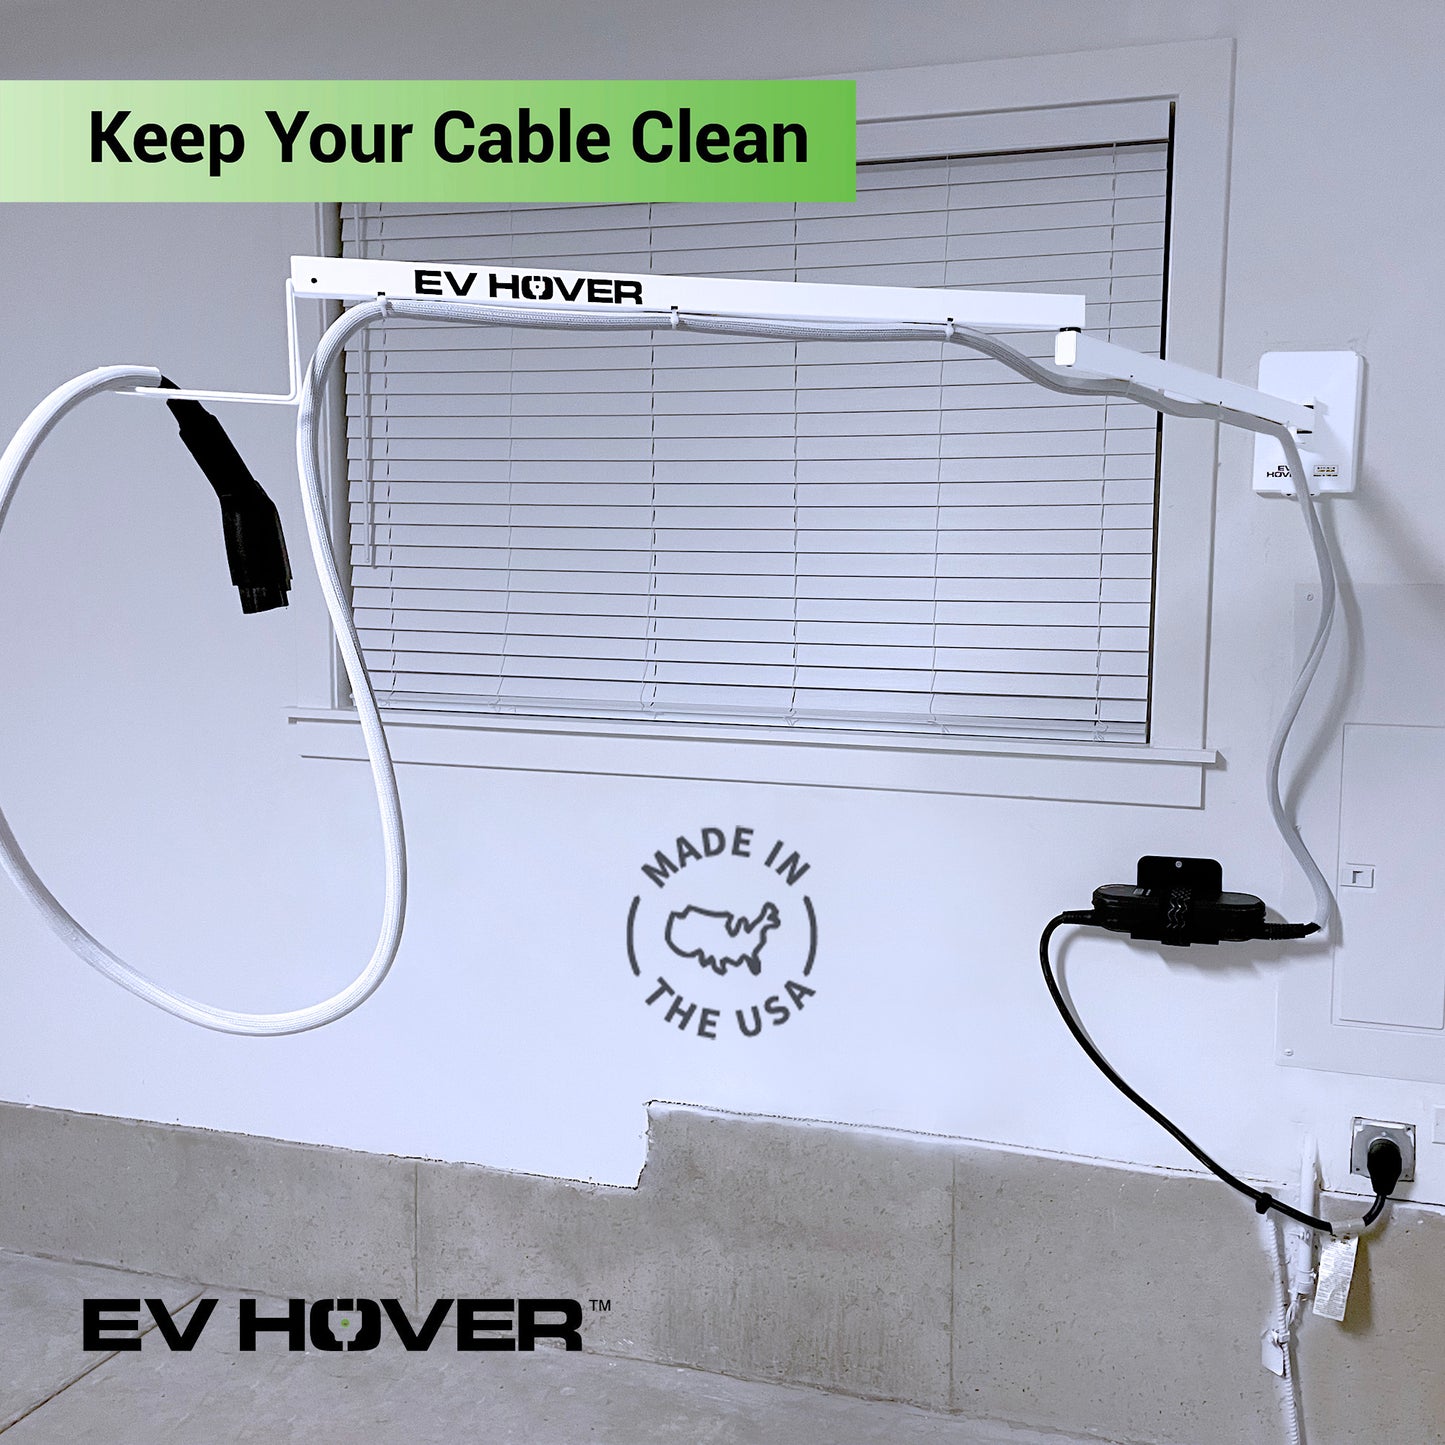 EV Hover - Electric Vehicle Cable Management System (Up to 9 1/2 ft with the extender - sold separately)